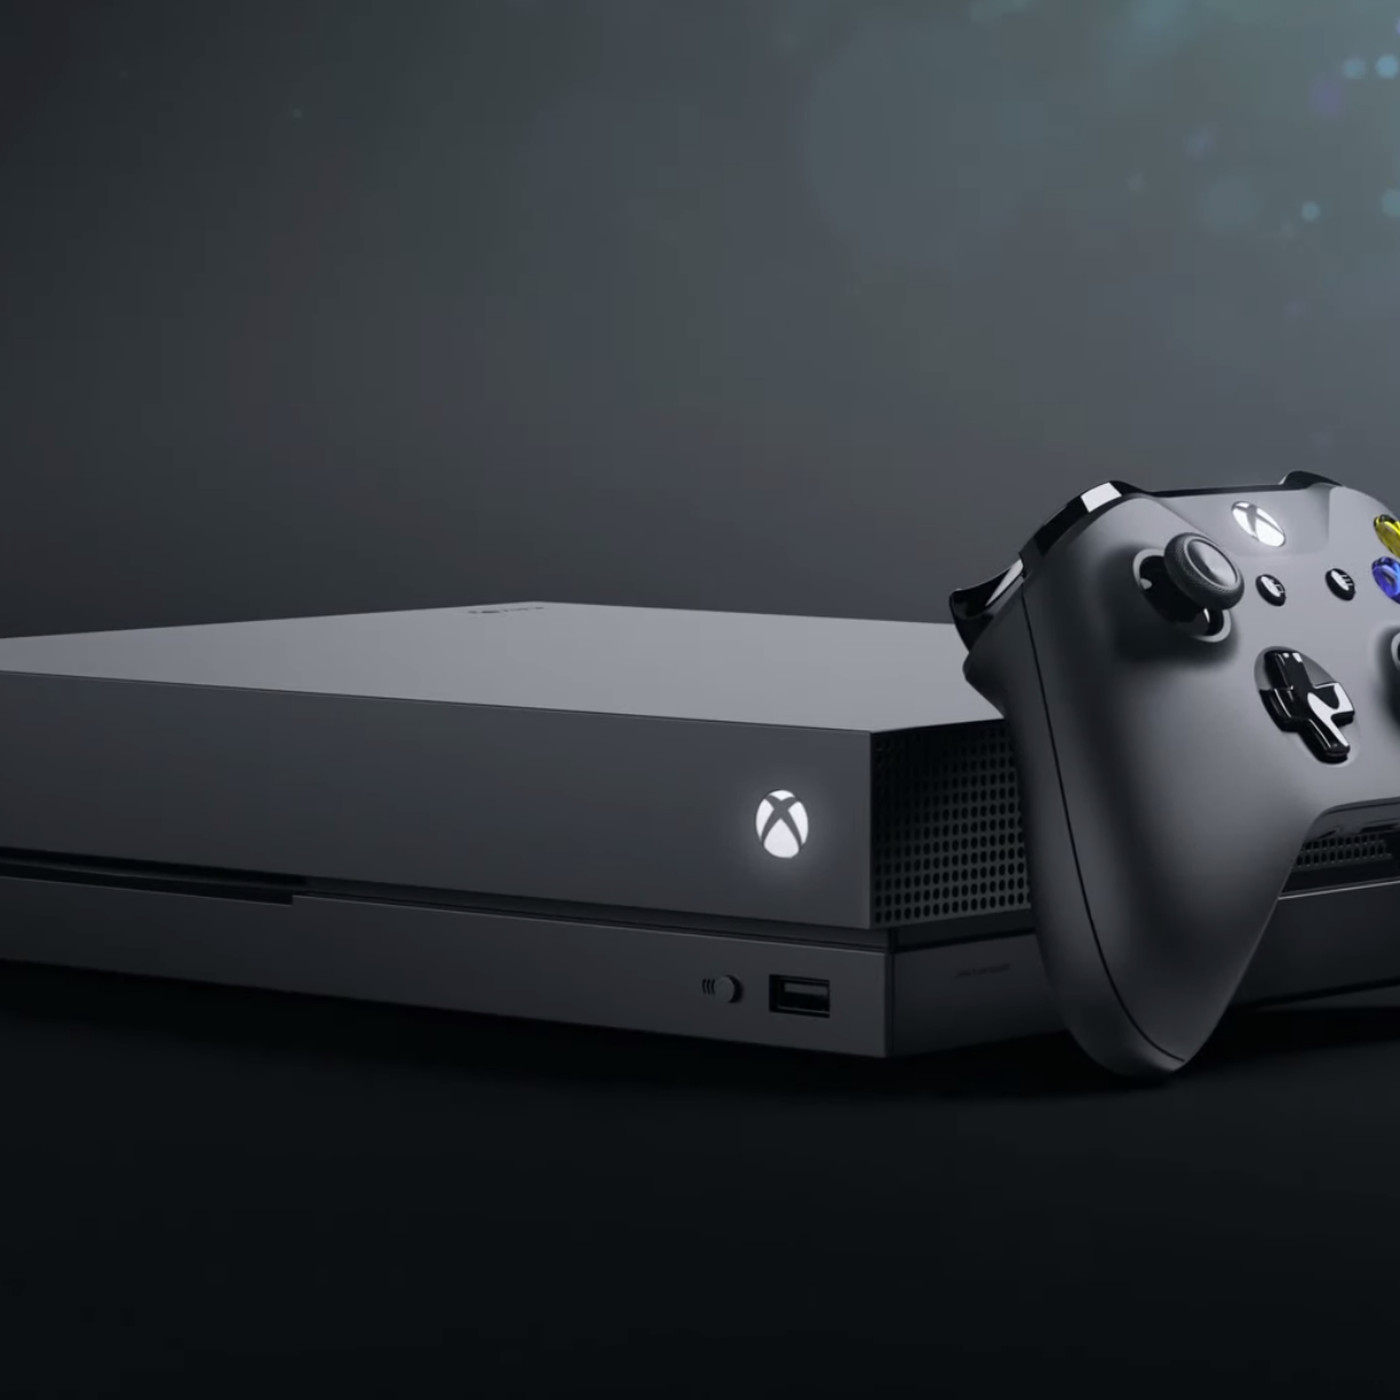 equilibrium dull ticket Microsoft's Xbox One X price will start at $499 - The Verge